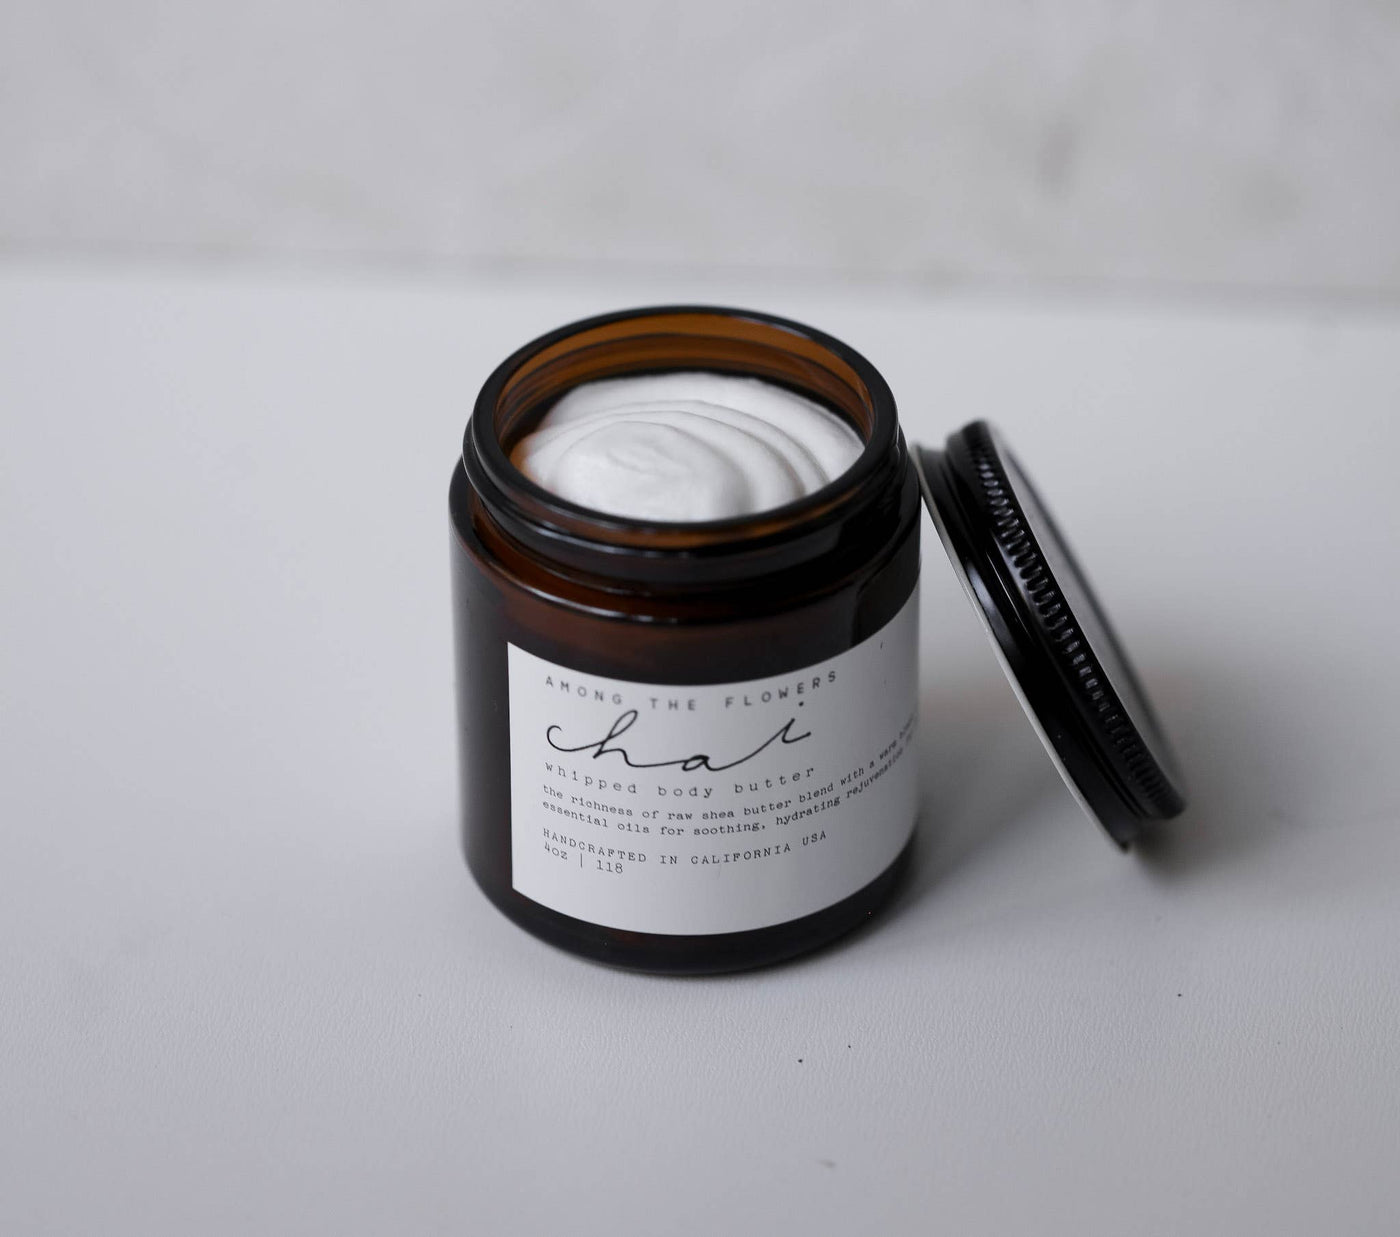 Among the Flowers - Whipped Body Butter: Chai